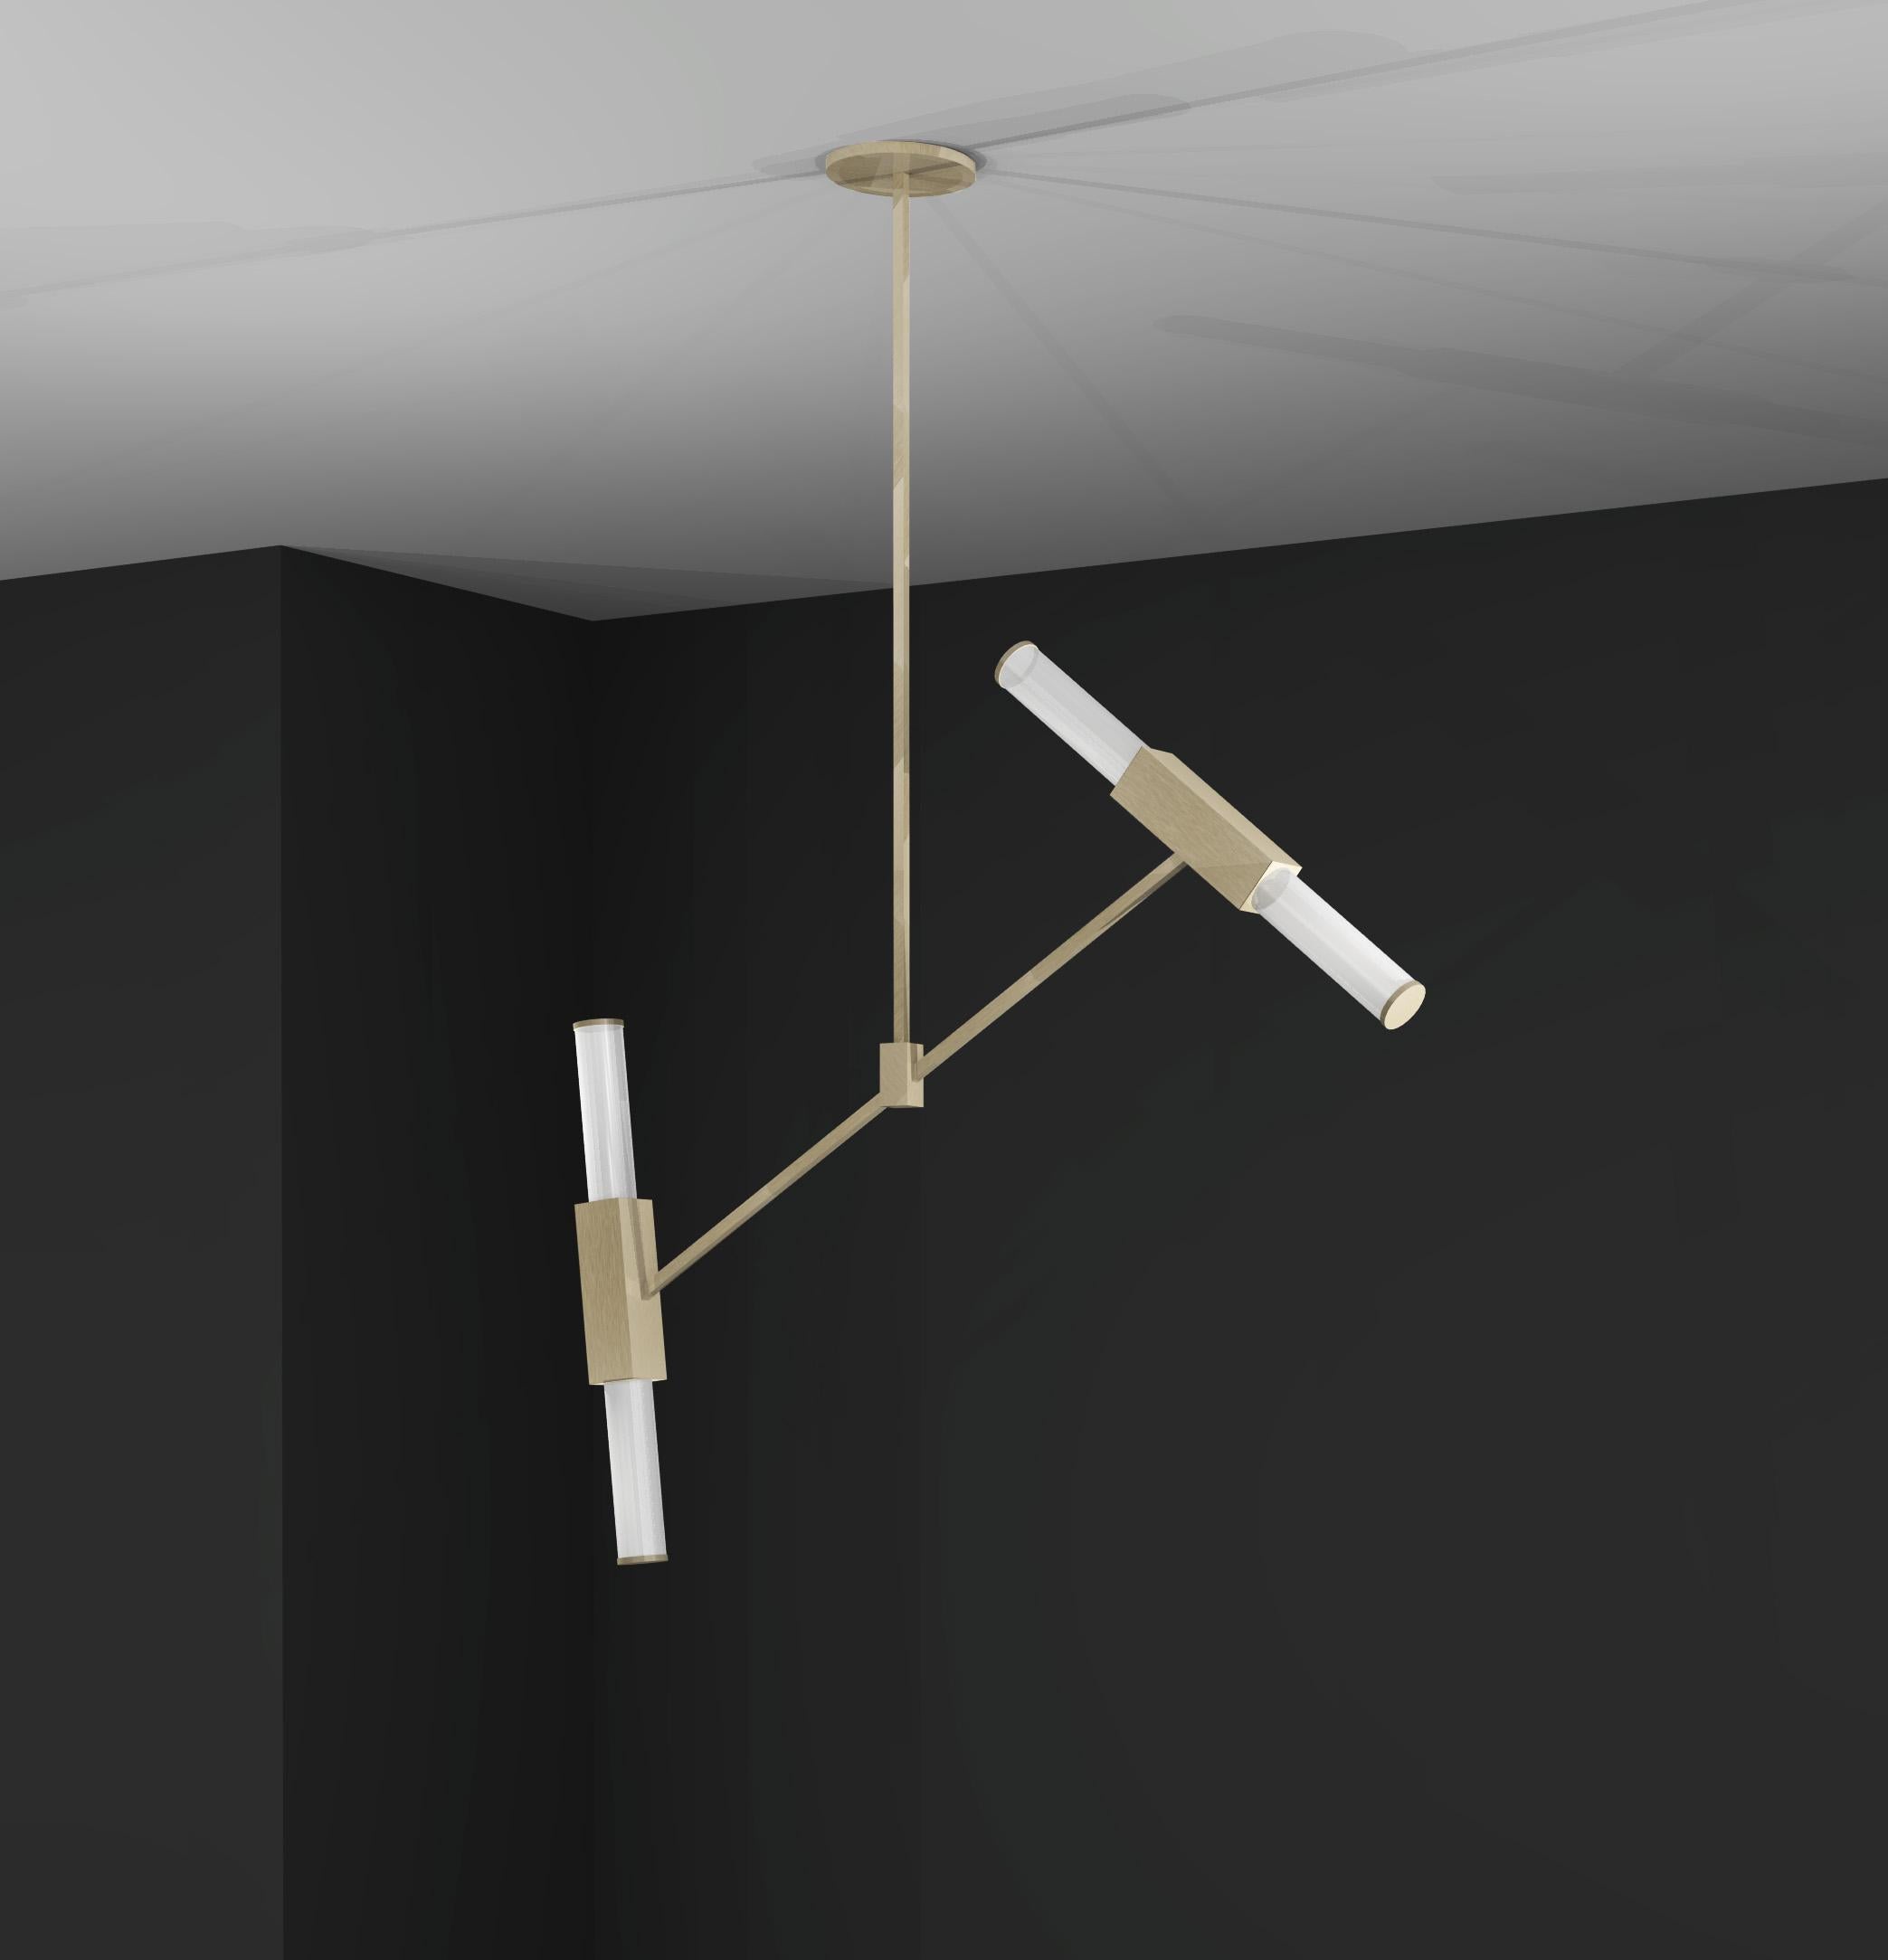 This pendant is part of a range that was originally designed as bathroom lights and developed into a full collection, created to achieve a timeless design. Using high quality materials including fine brass and glass, a striking, sleek design creates